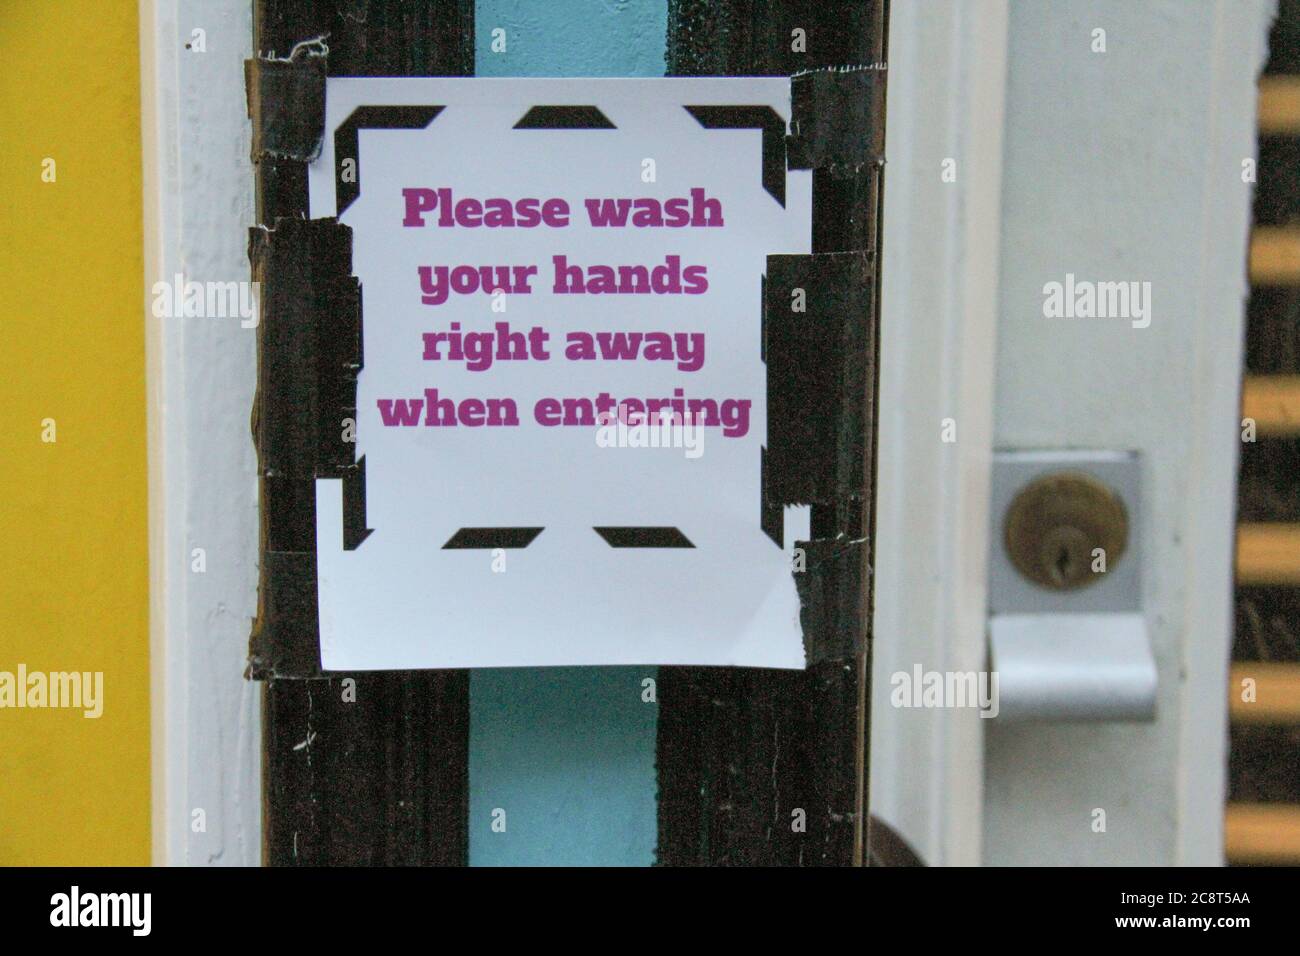 London, UK. 26th July, 2020. A sign outside a shop in Bricklane reminds customers to wash their hands on entering the premises.The Government has made it mandatory to wear face coverings in all public transport, supermarkets and indoor shopping centers as a measure to combat the spread of the novel coronavirus. Credit: SOPA Images Limited/Alamy Live News Stock Photo